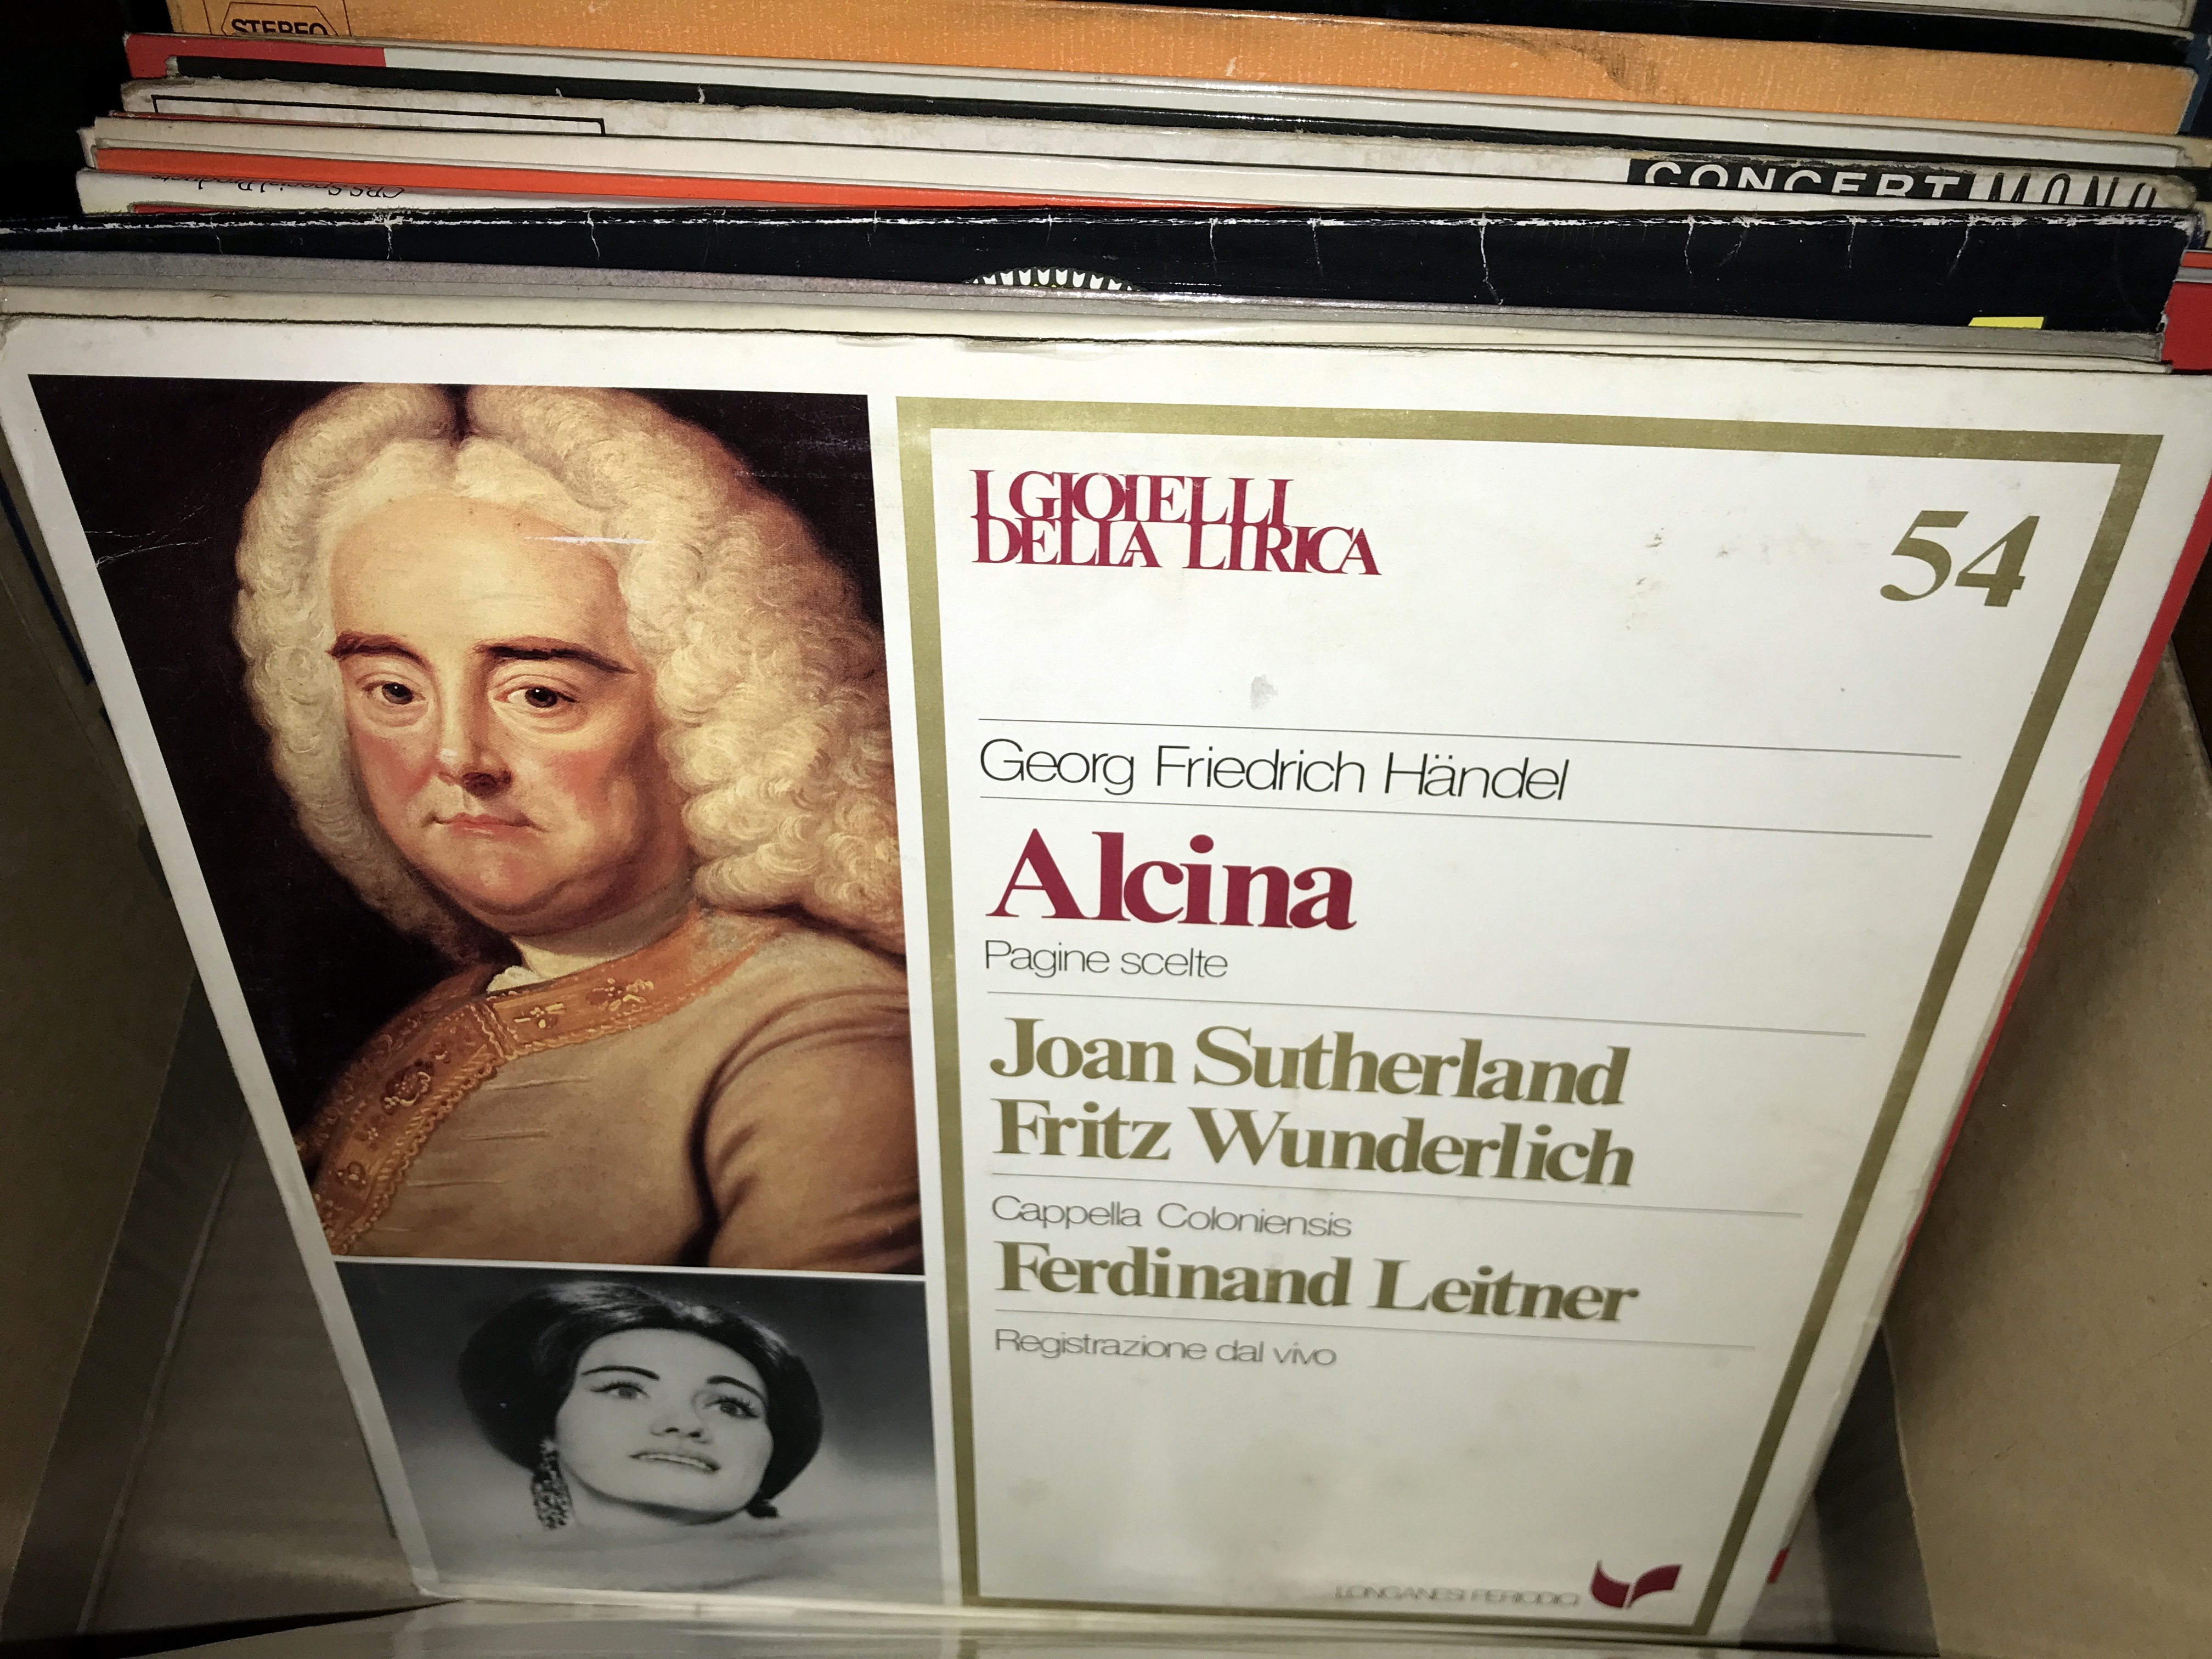 Over 150 classical LP records includes sxl wide band, asds, - Image 12 of 19